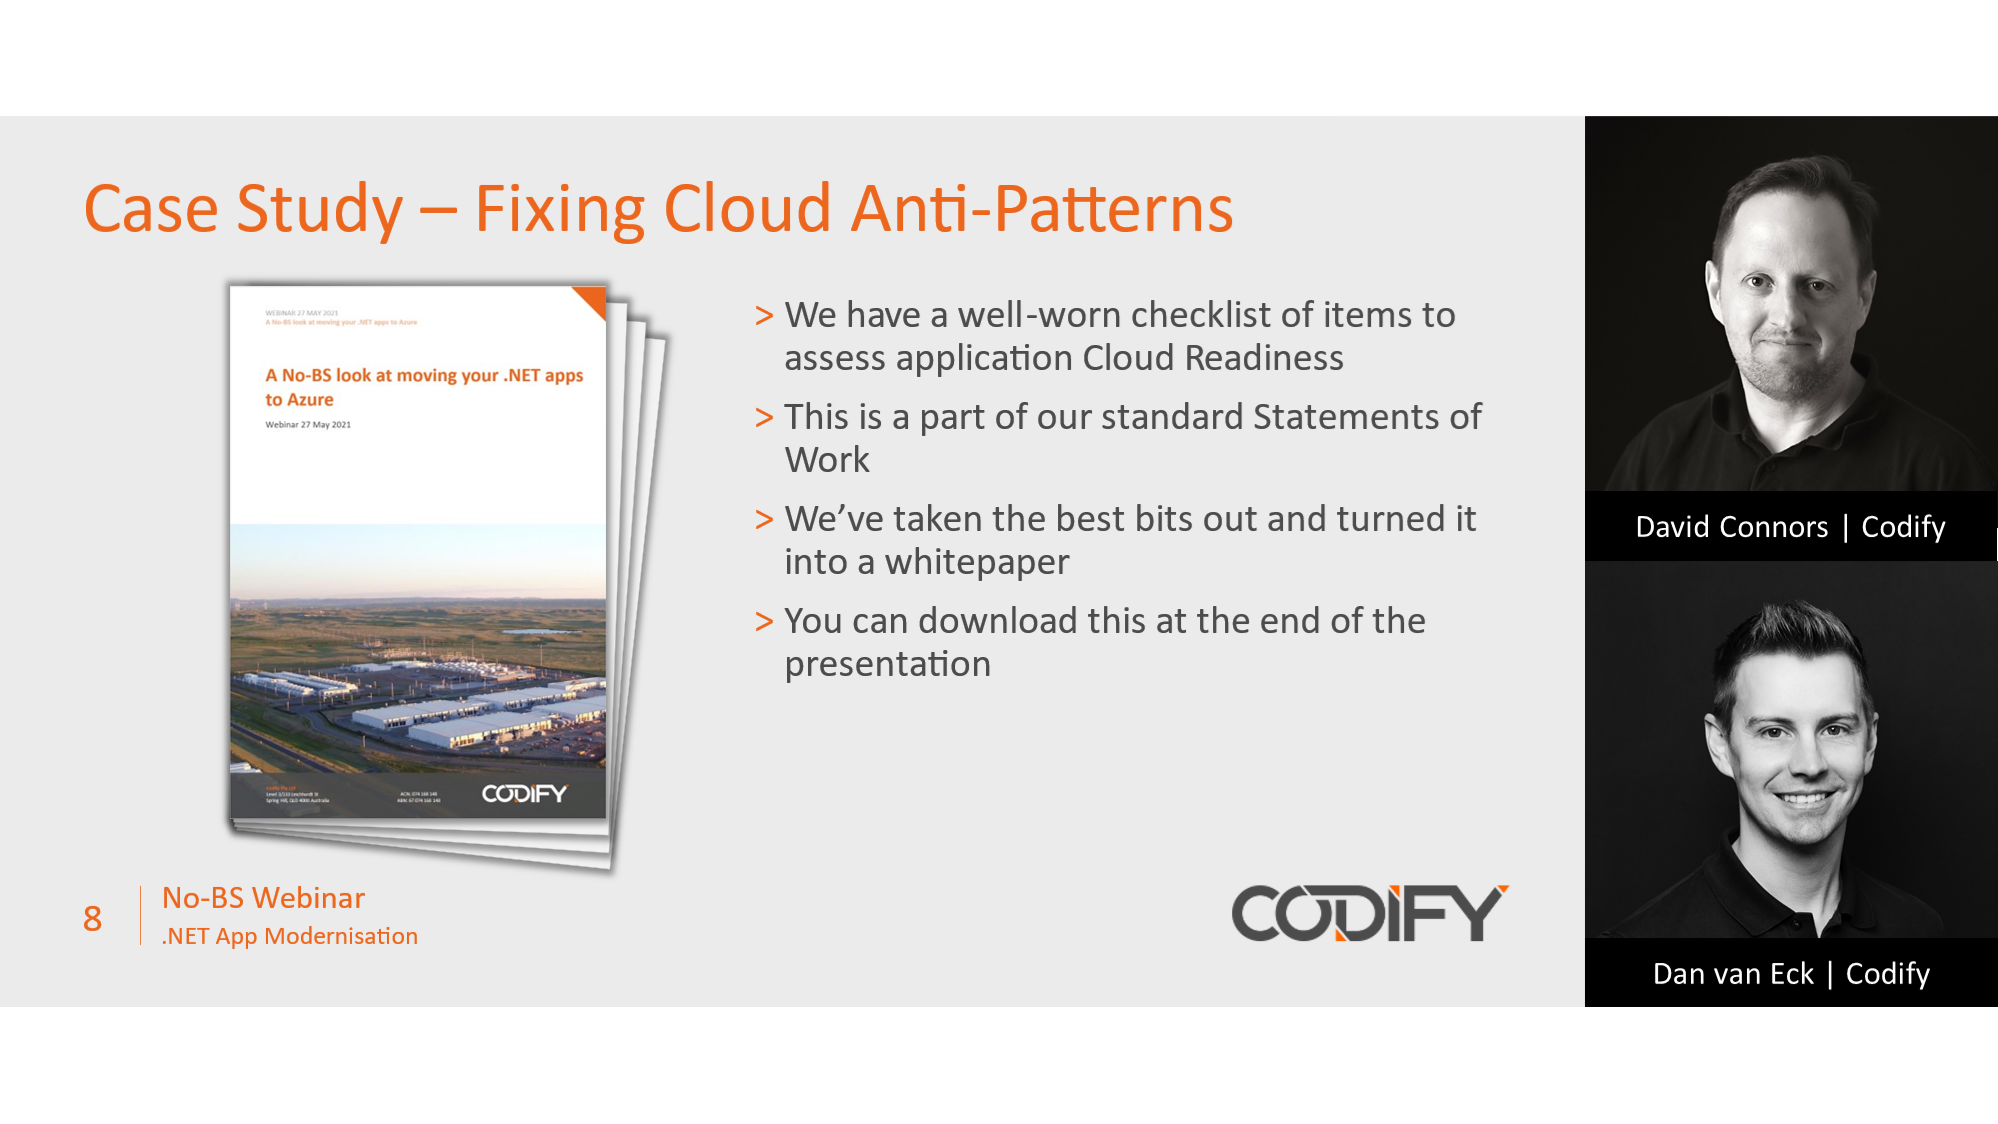 David Connors and Dan van Eck from Codify presenting a No-BS webinar on .NET App modernisation